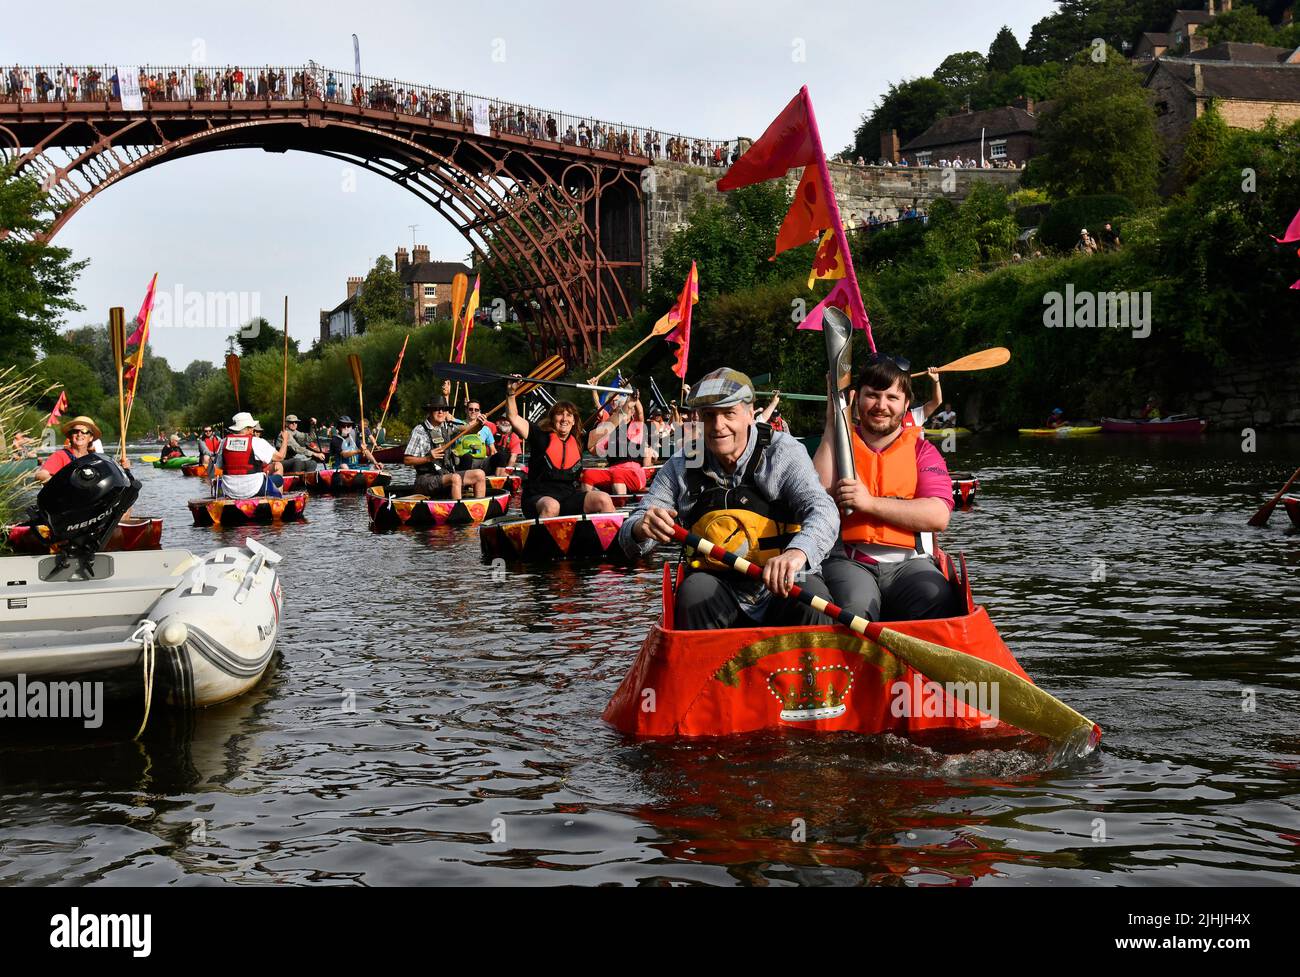 Ironbridge, Shropshire, Uk. July 19th 2022. Queen's Baton Relay. The Commonwealth Games Queen's Baton Relay passing through Ironbridge in Shropshire. The baton travelled by coracle on the River Severn escorted by a flotilla of coracles from the Ironbridge Coracle Society. Credit: Dave Bagnall /Alamy Live News Stock Photo